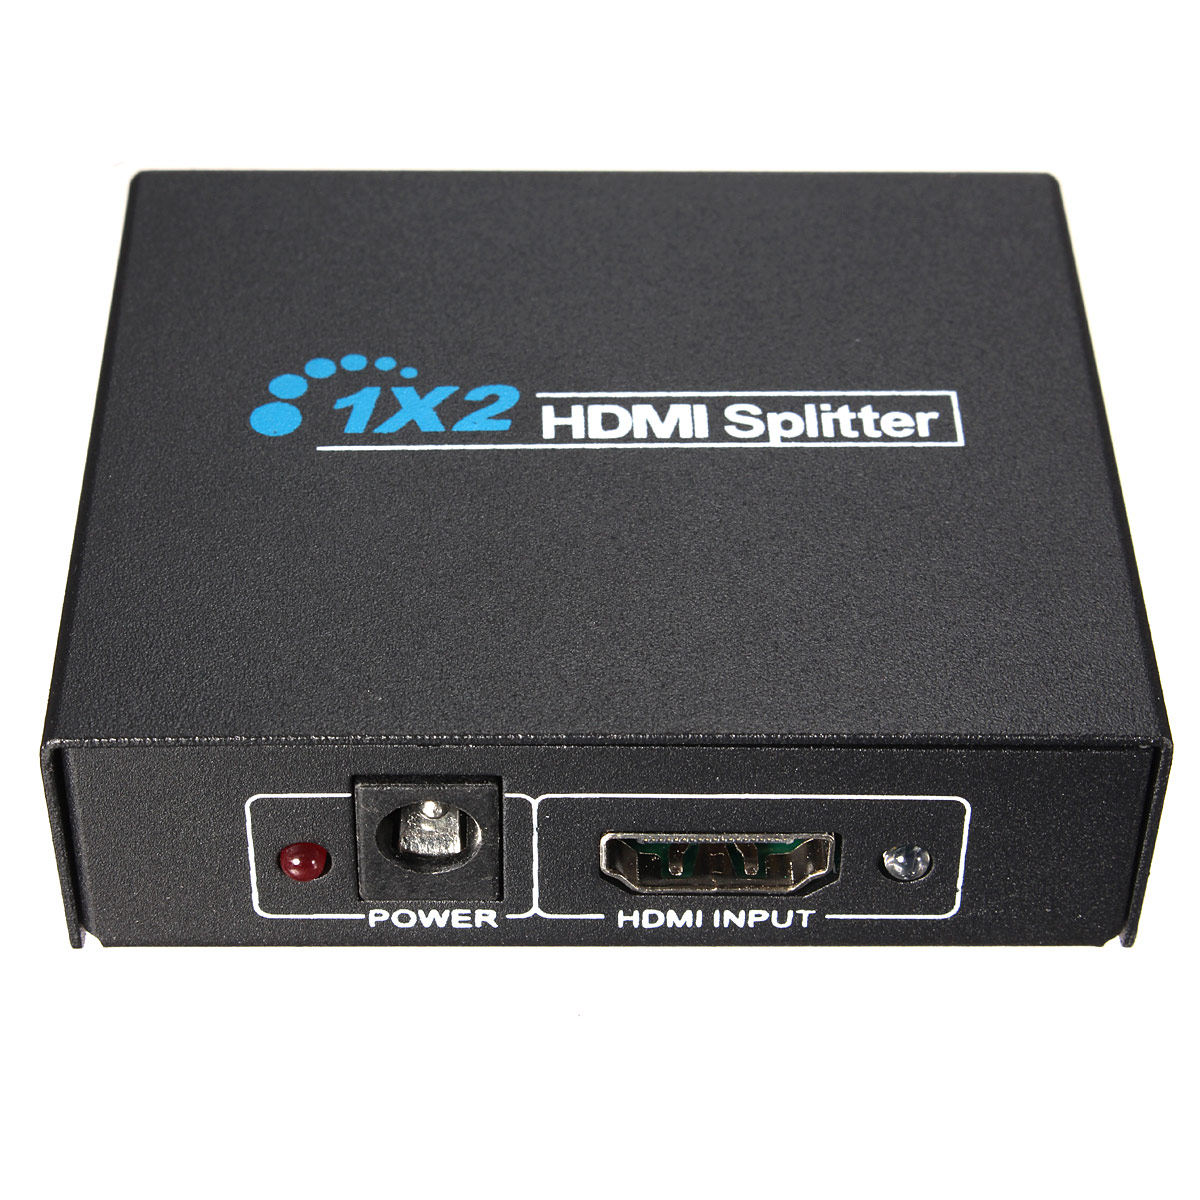 

HD 1x2 Port HDMI Splitter Amplifier Repeater 3D 1080P Switch Box Hub For DVD PS3